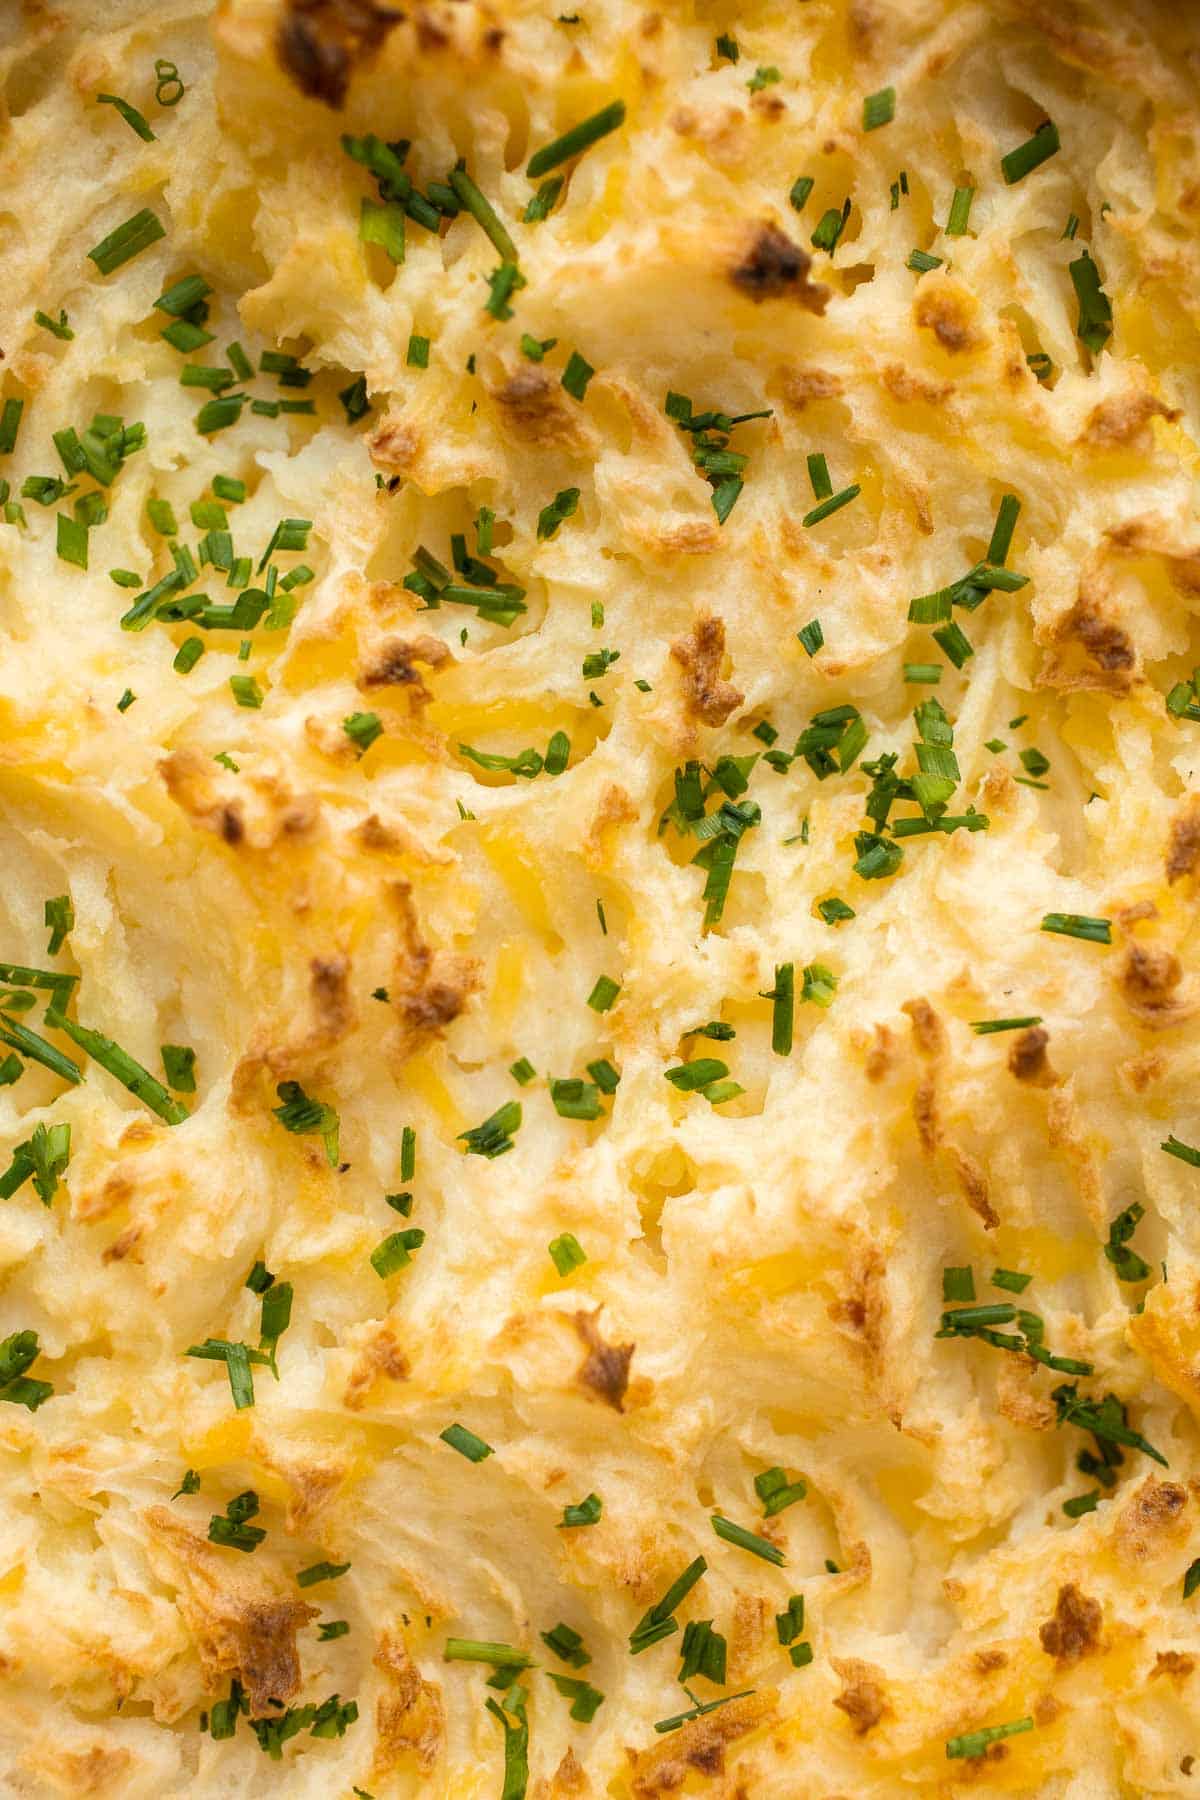 Baked Mashed Potatoes are buttery, cheesy, and crispy on the outside. Topped with chives and served warm, this side dish that will change your hosting game. | aheadofthyme.com